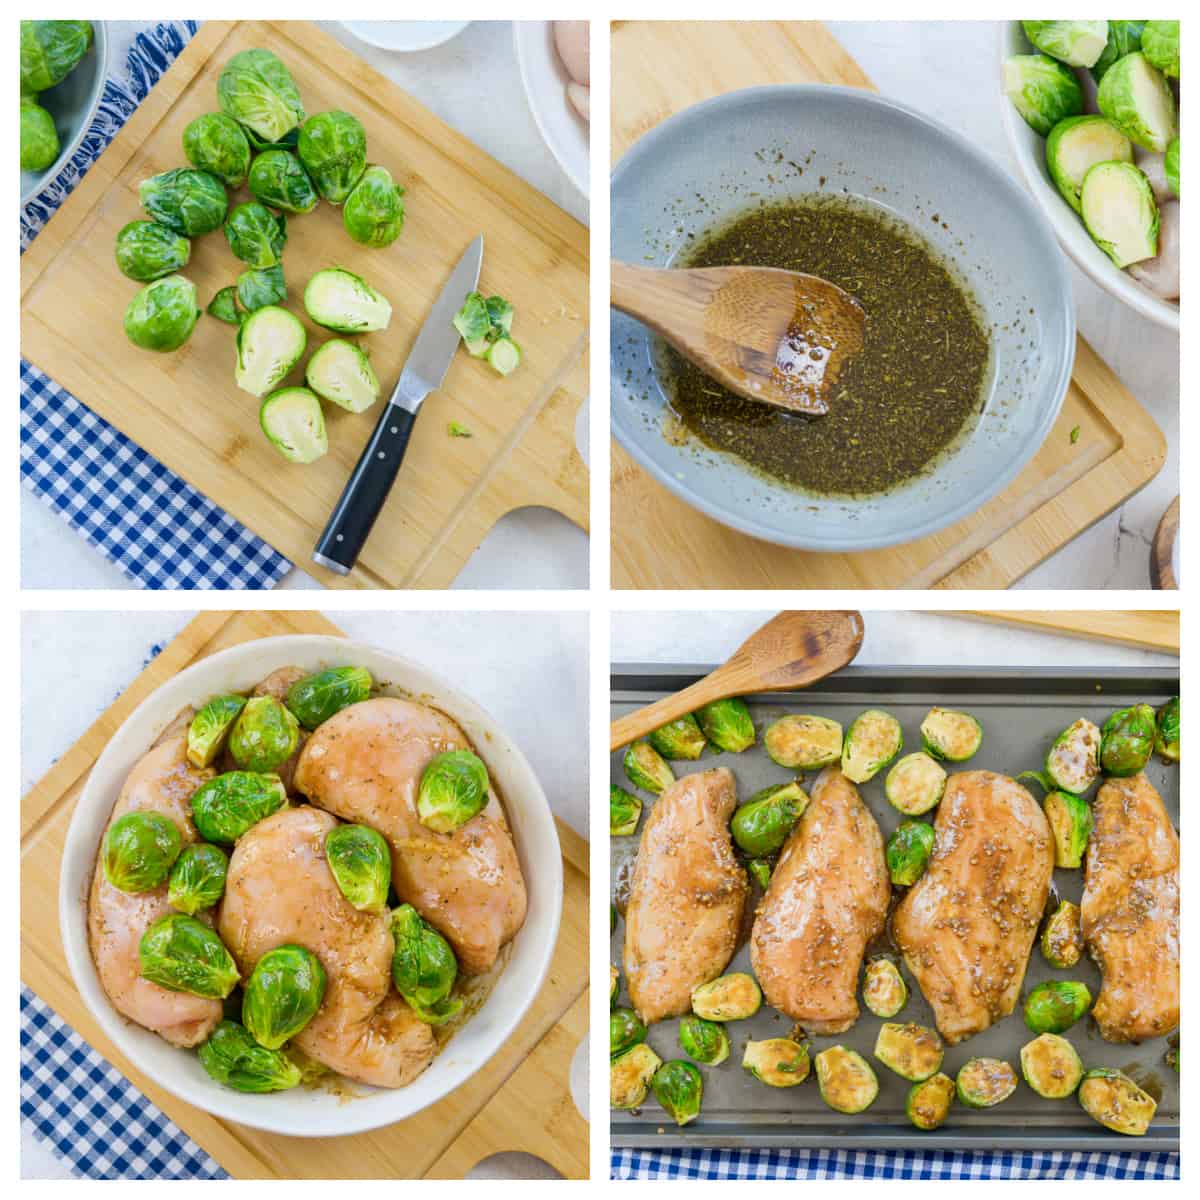 Collage showing how to make chicken and brussels sprouts recipe.